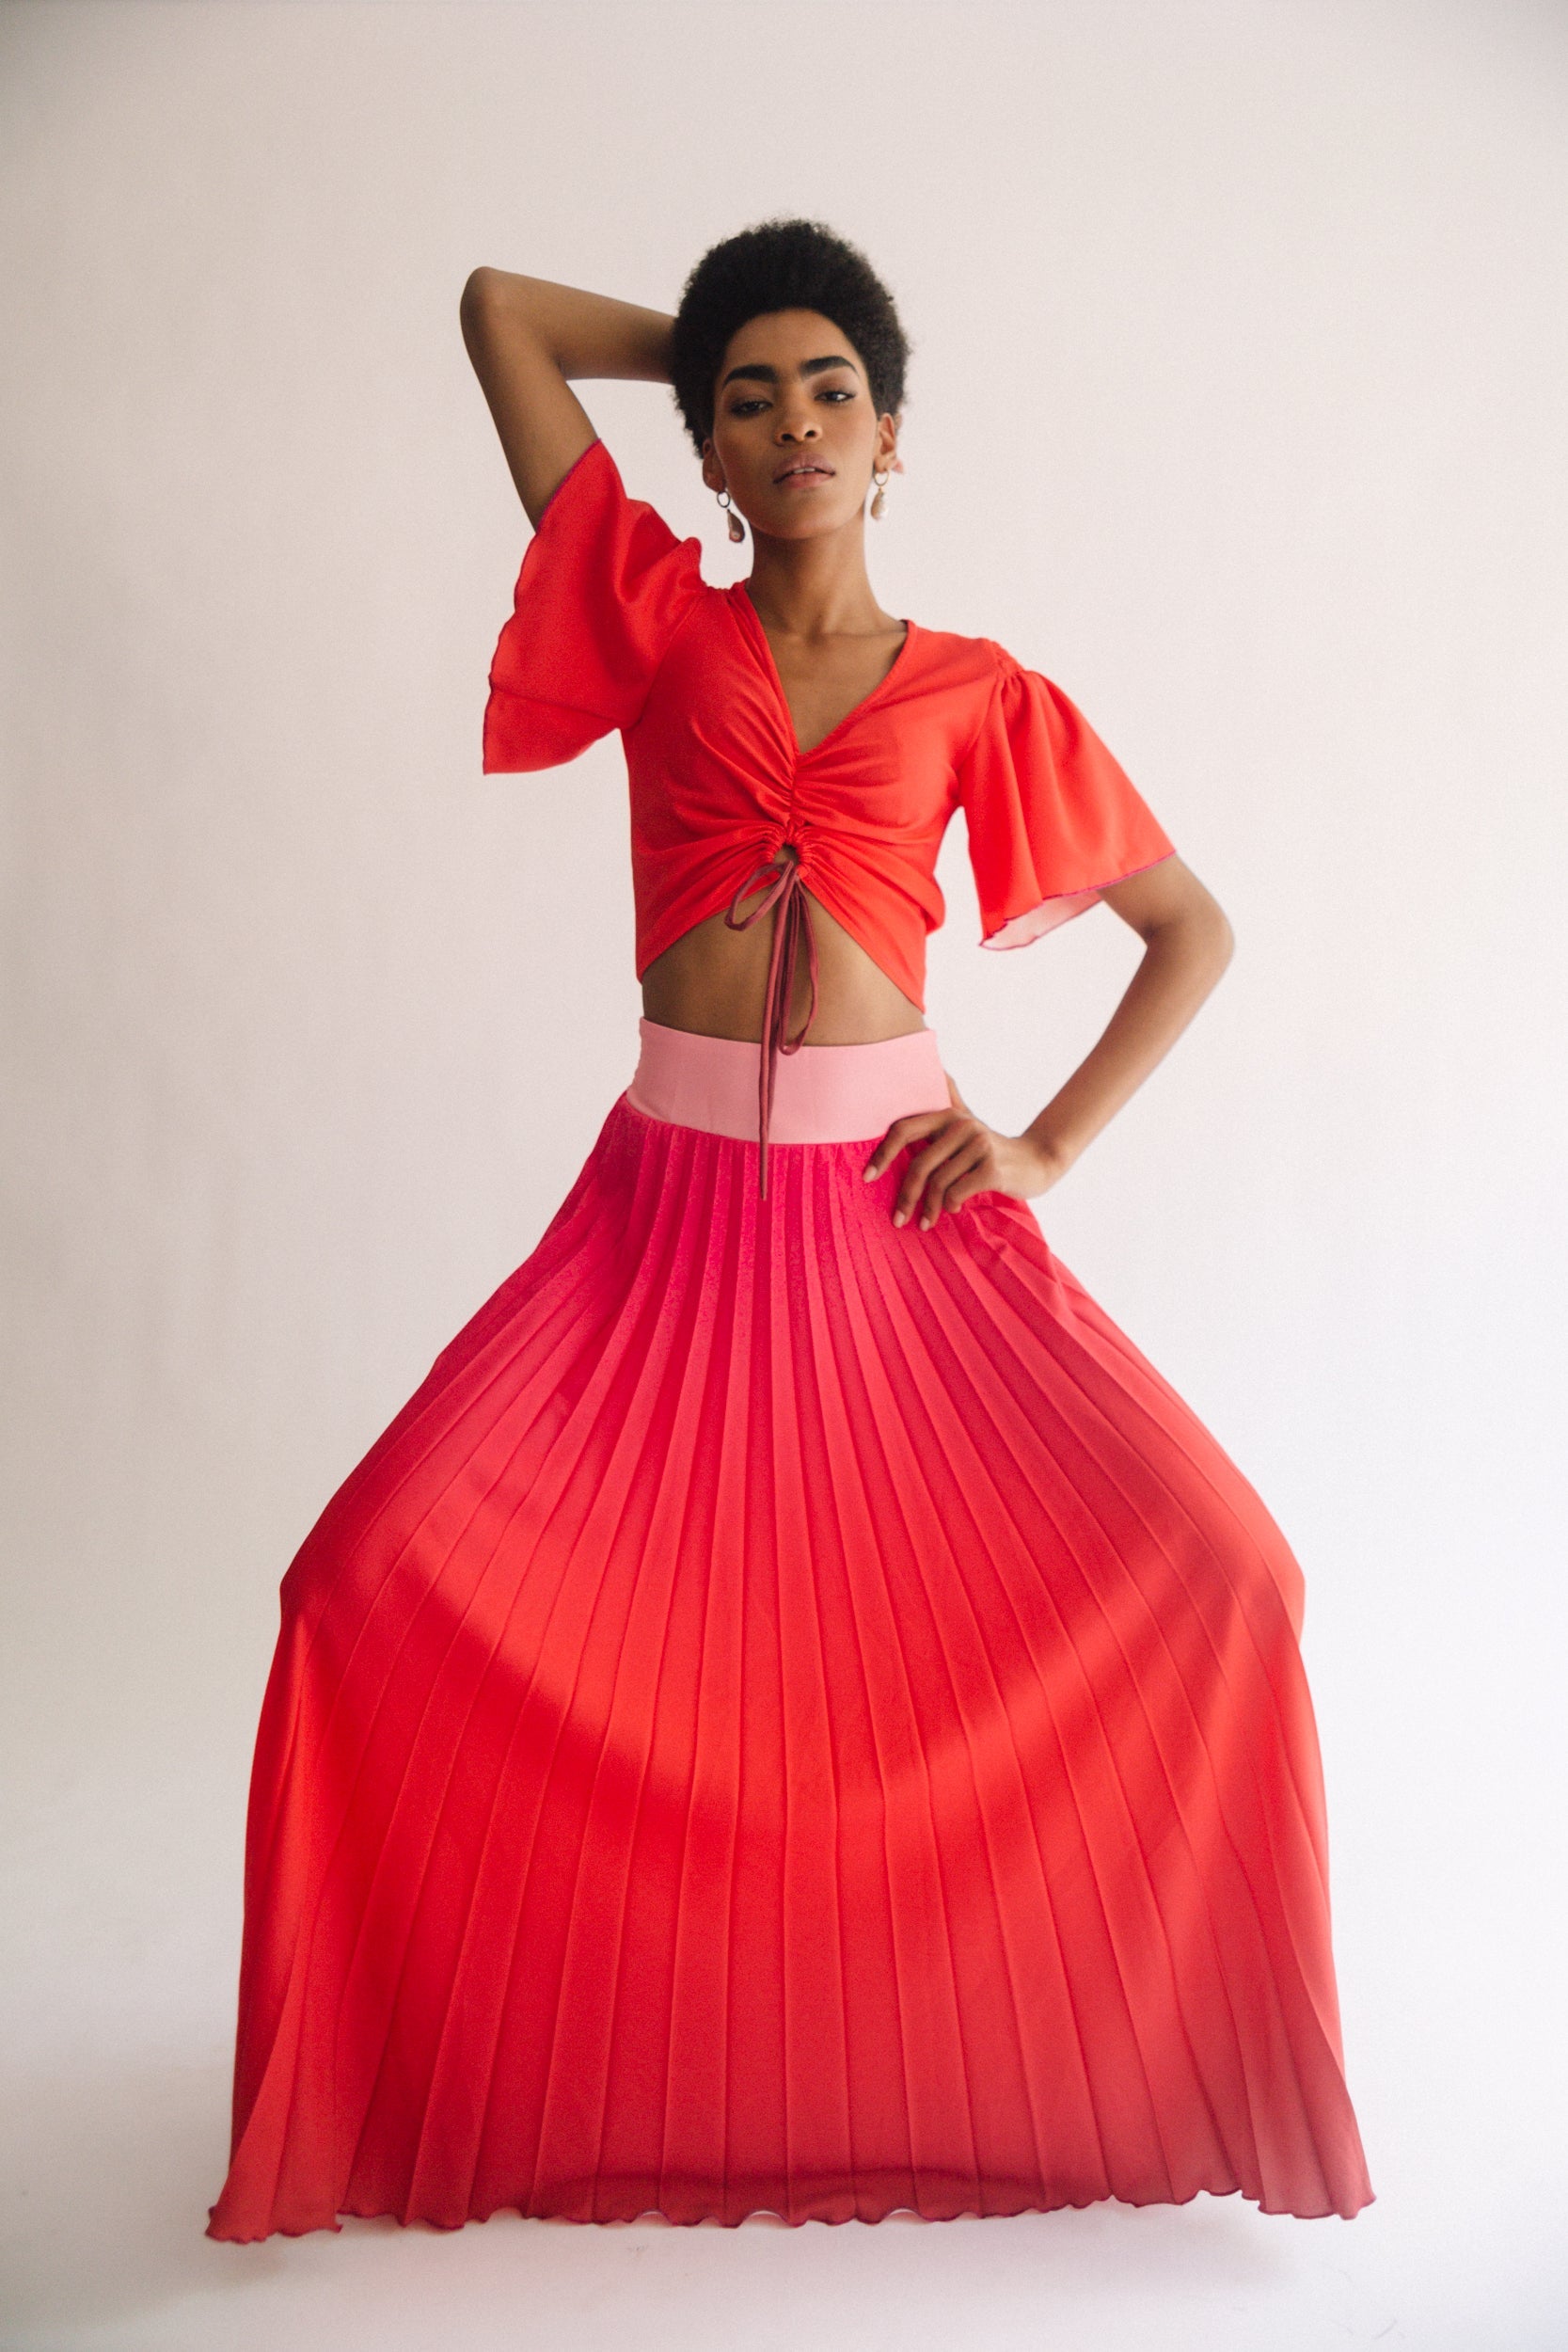 Details more than 220 coral pleated maxi skirt best